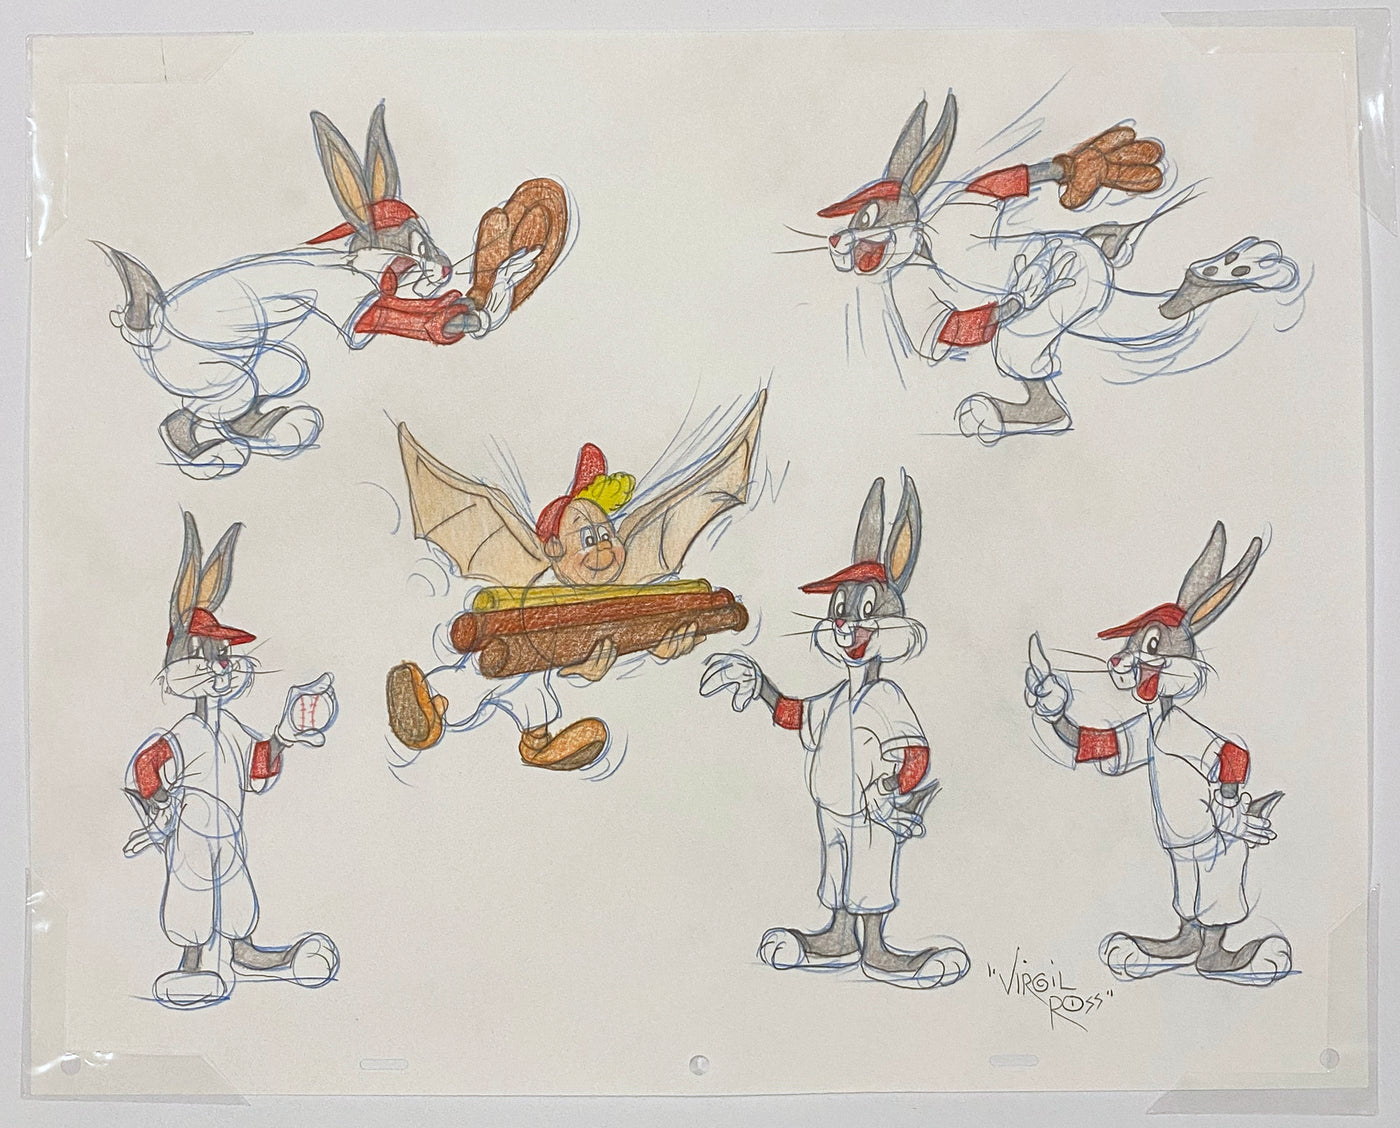 Original Warner Brothers Virgil Ross Model Sheet Animation Drawing featuring Bugs Bunny and Bat-boy